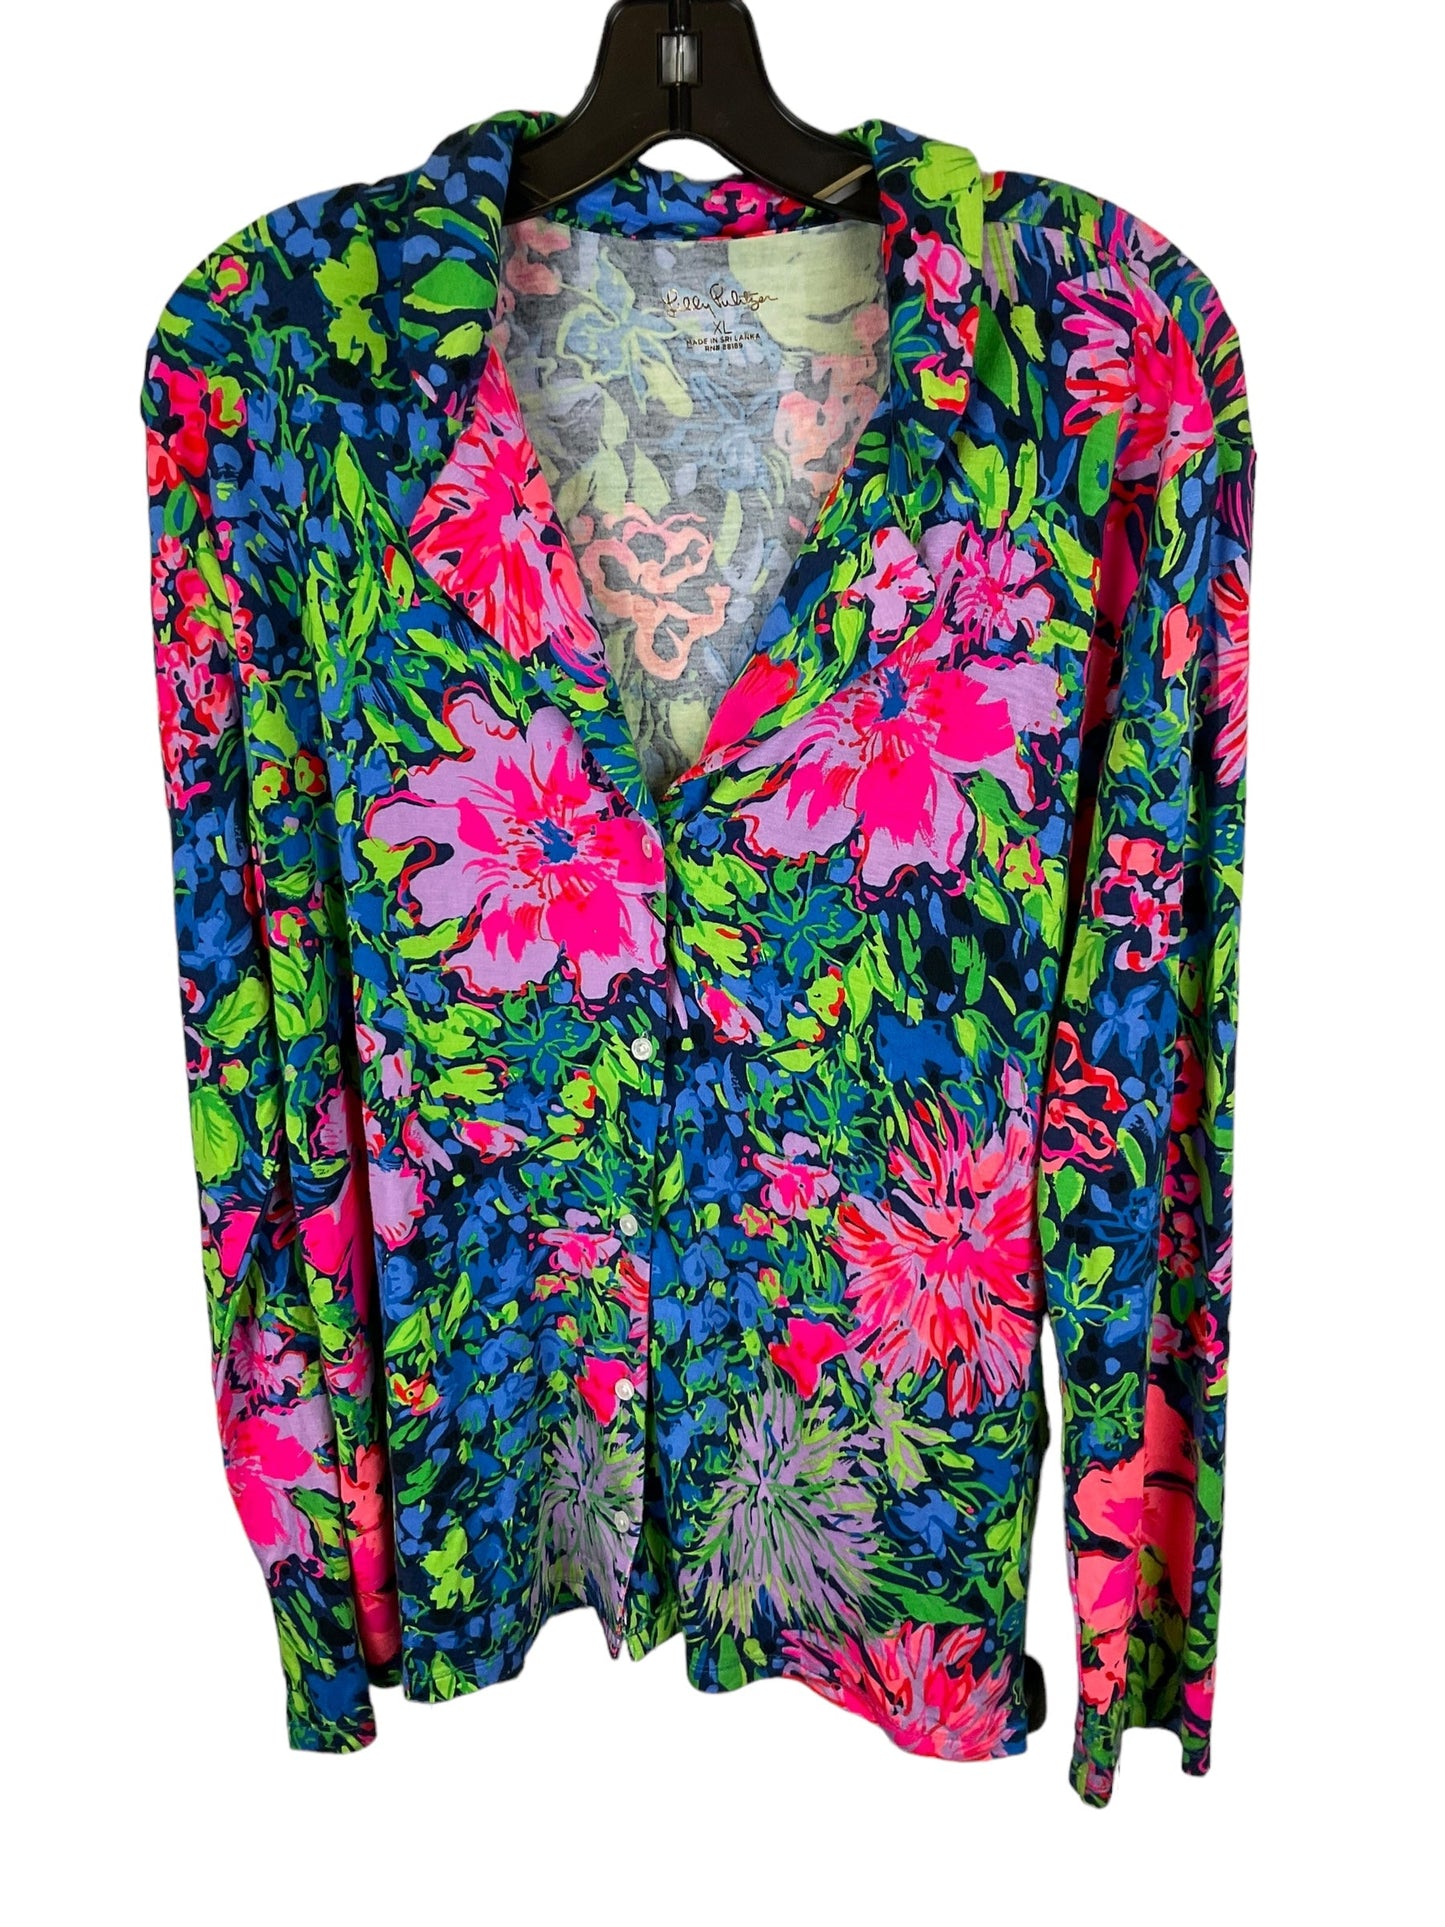 Floral Print Top Long Sleeve Designer Lilly Pulitzer, Size Xl